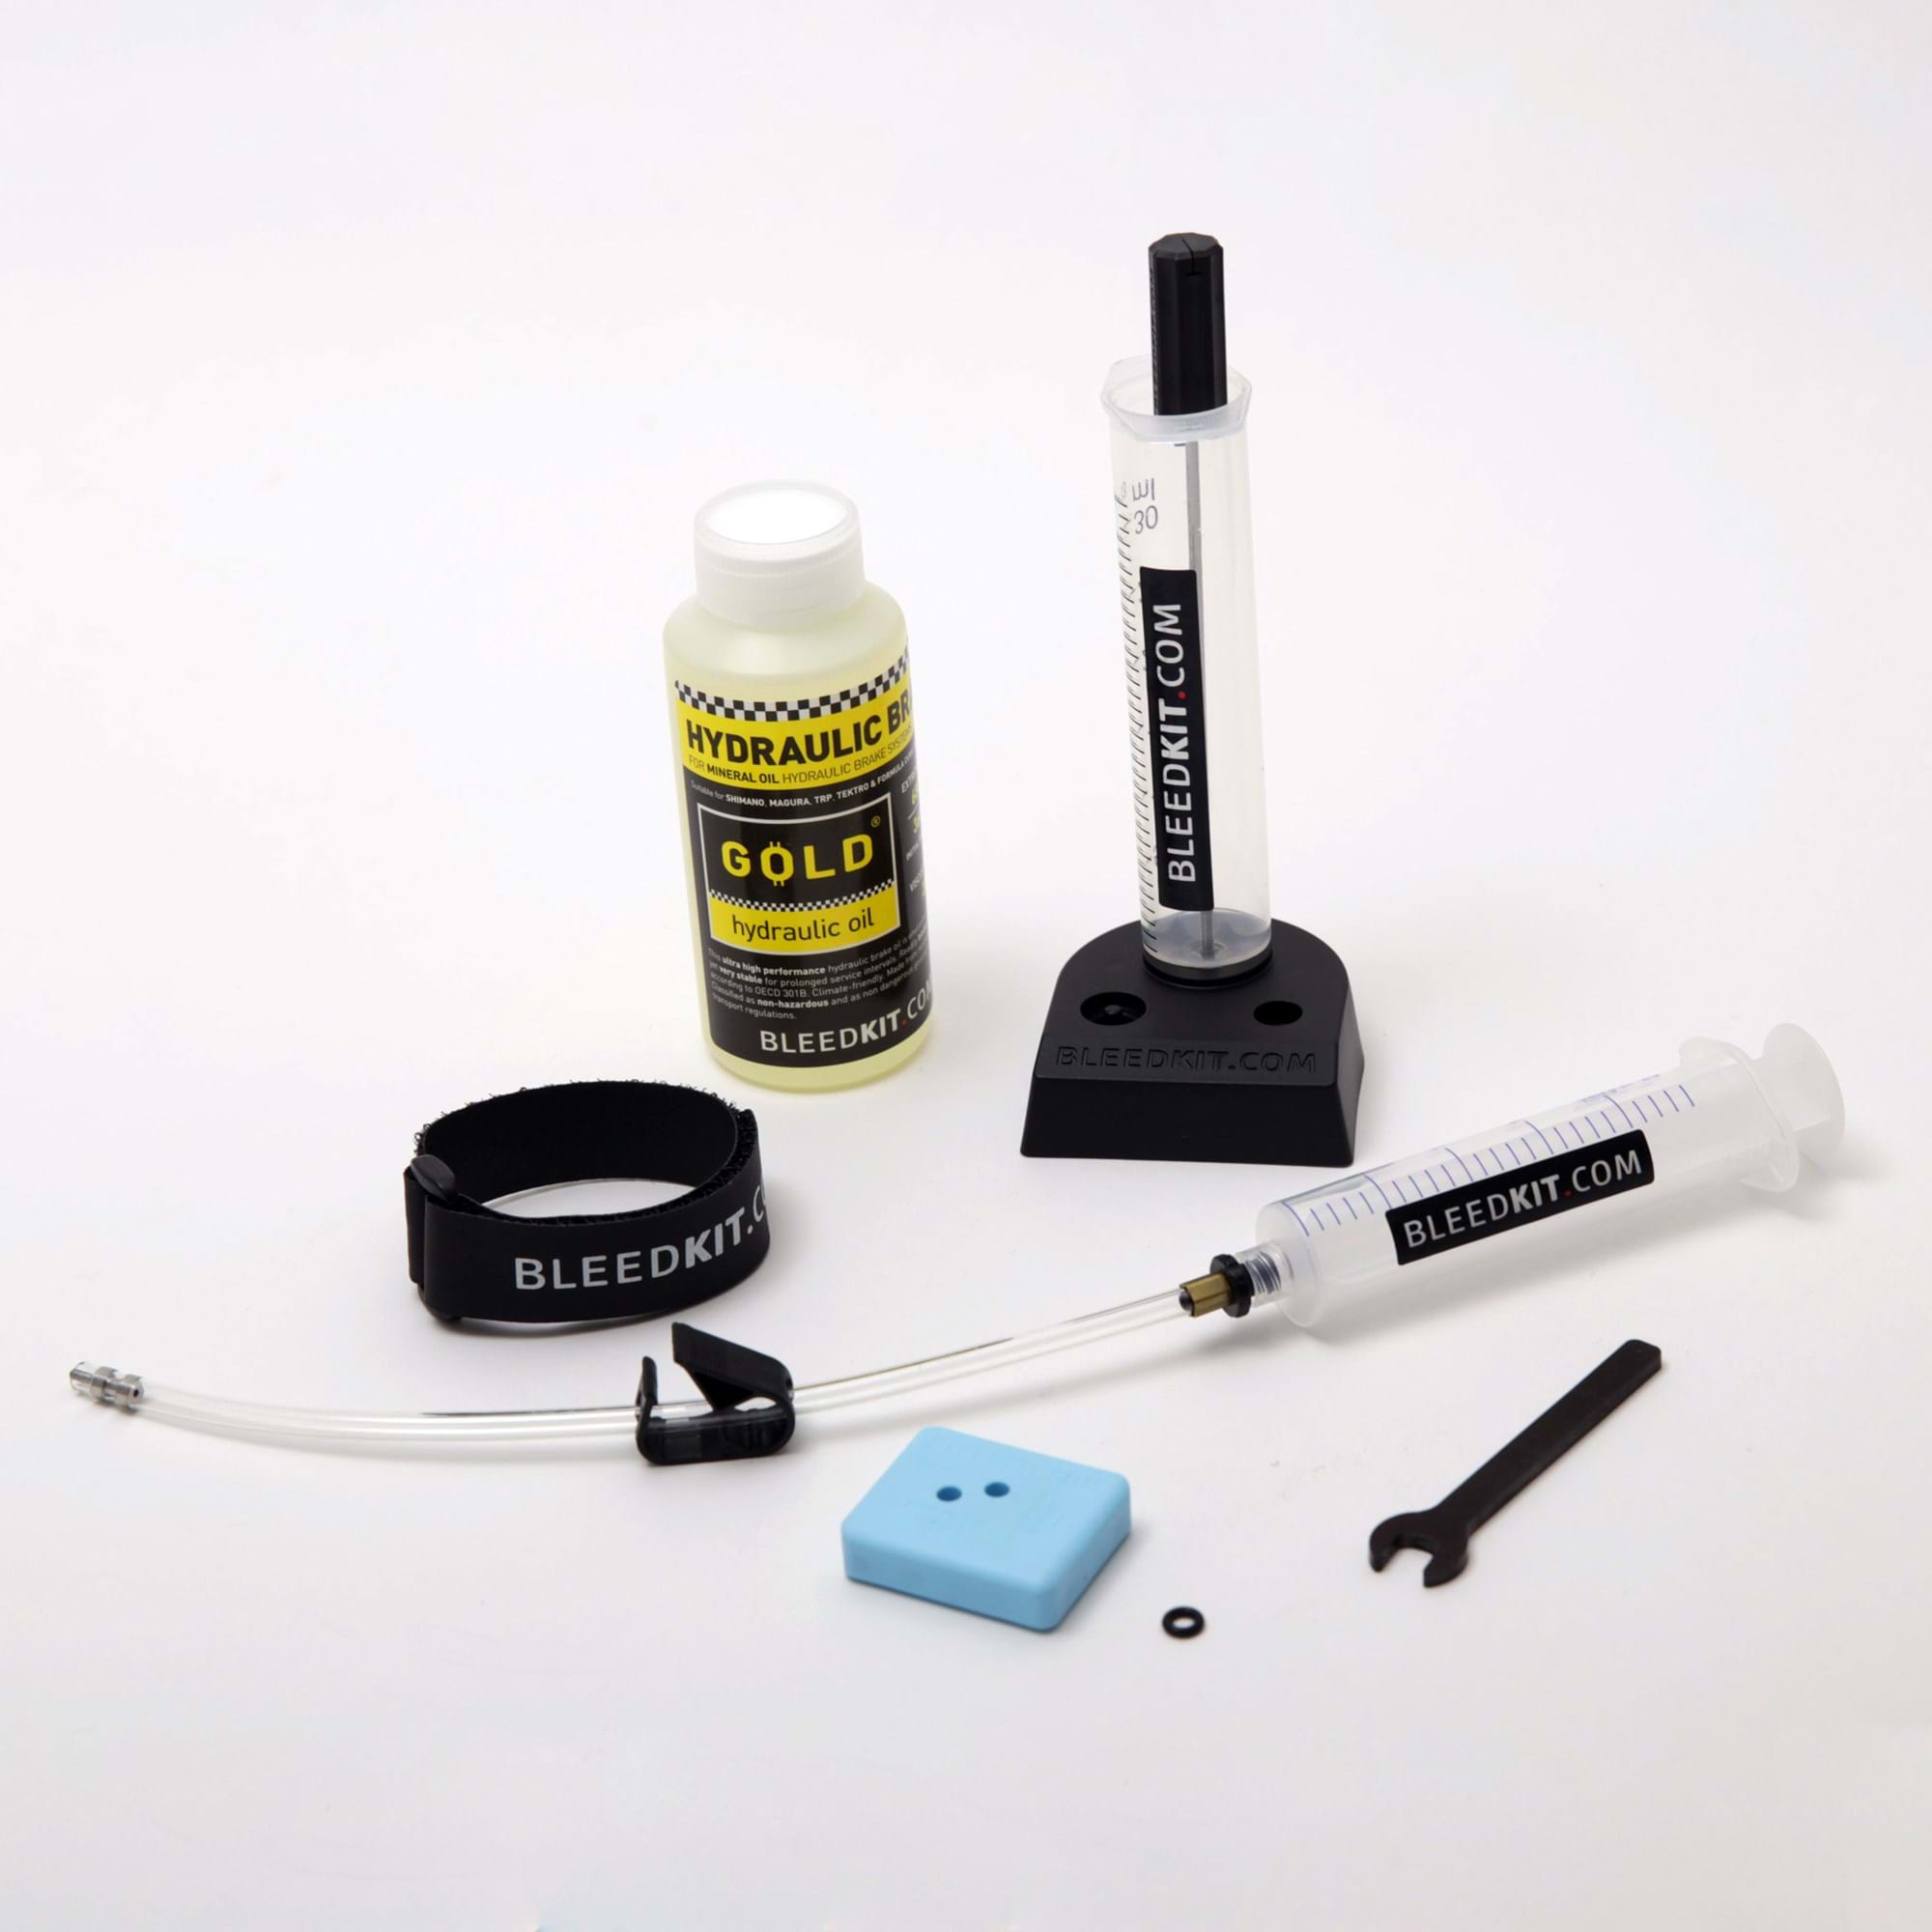 Shimano bleed kit laid out